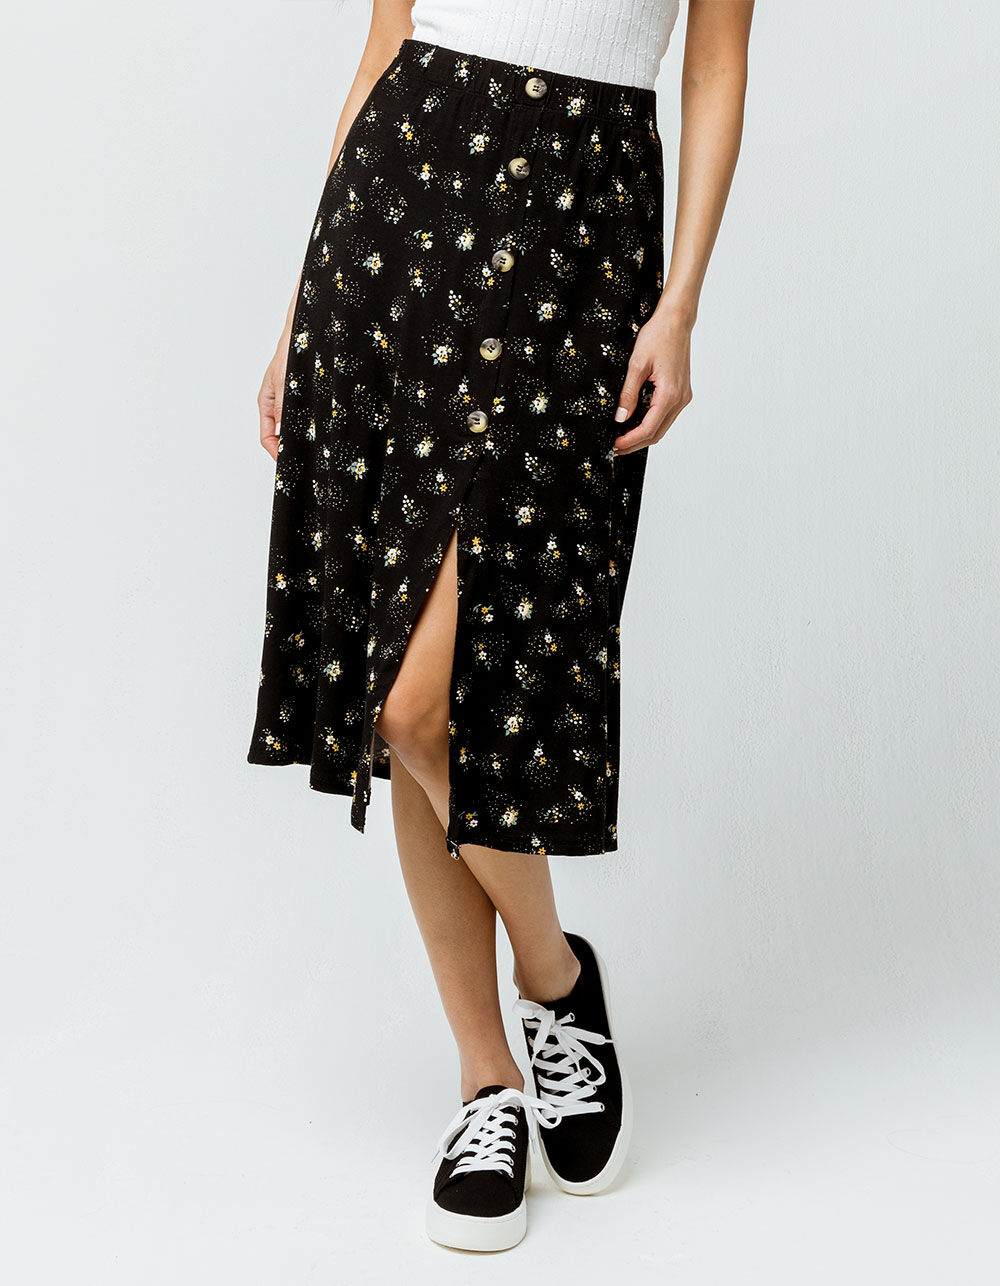 SKY AND SPARROW Floral Button Front Midi Skirt - BLACK COMBO | Tillys